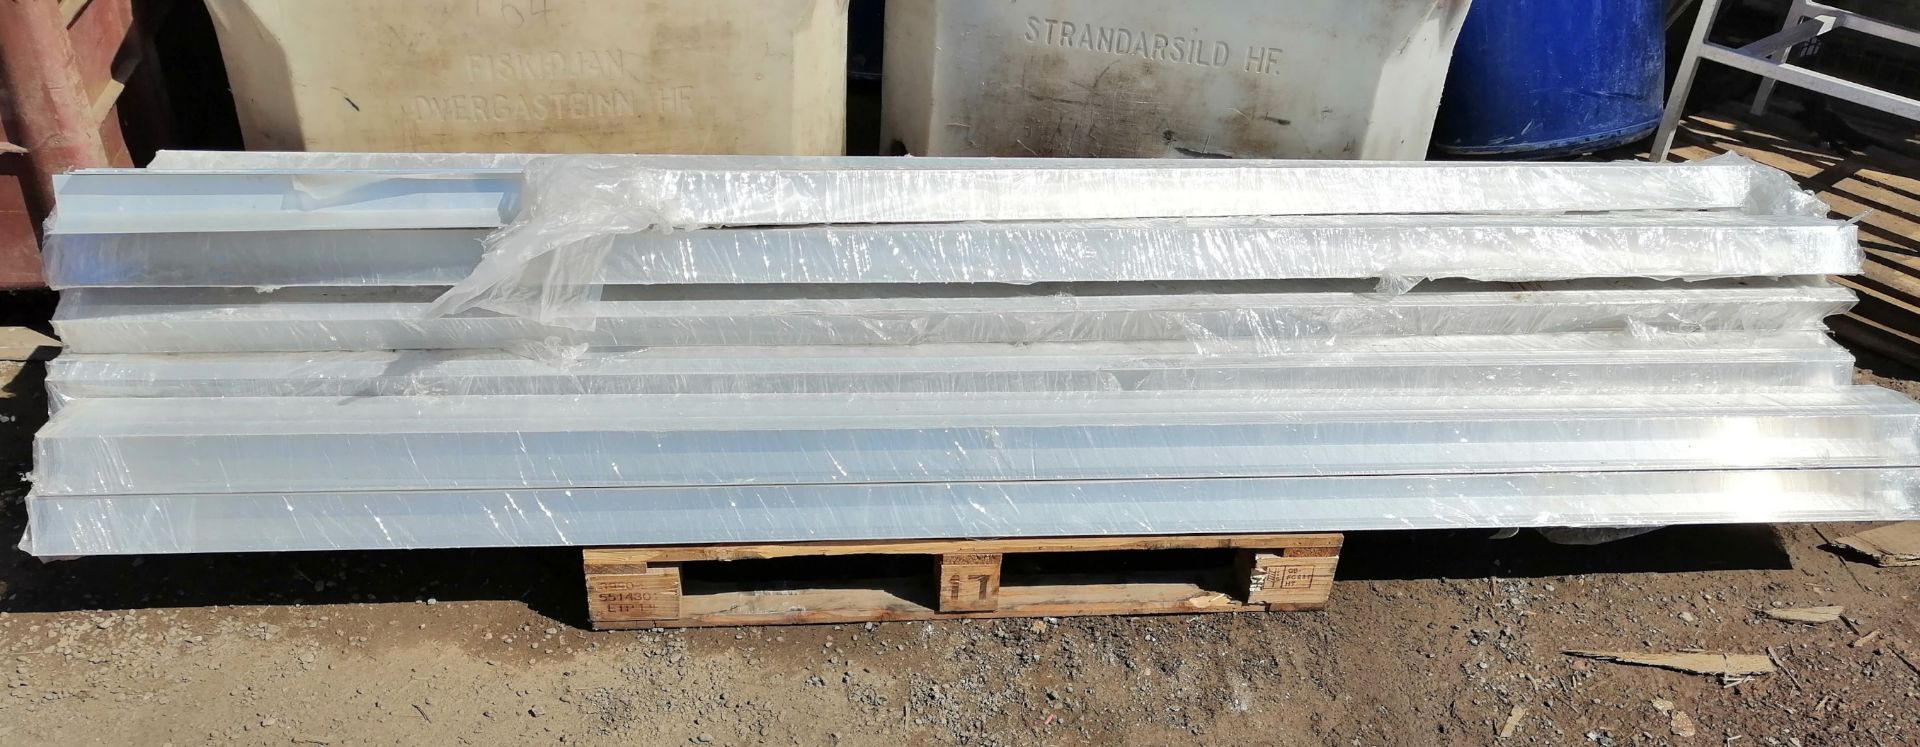 Aluminium Extrusions Approx 3m length - Approx 20 packs of 2. - Image 2 of 2